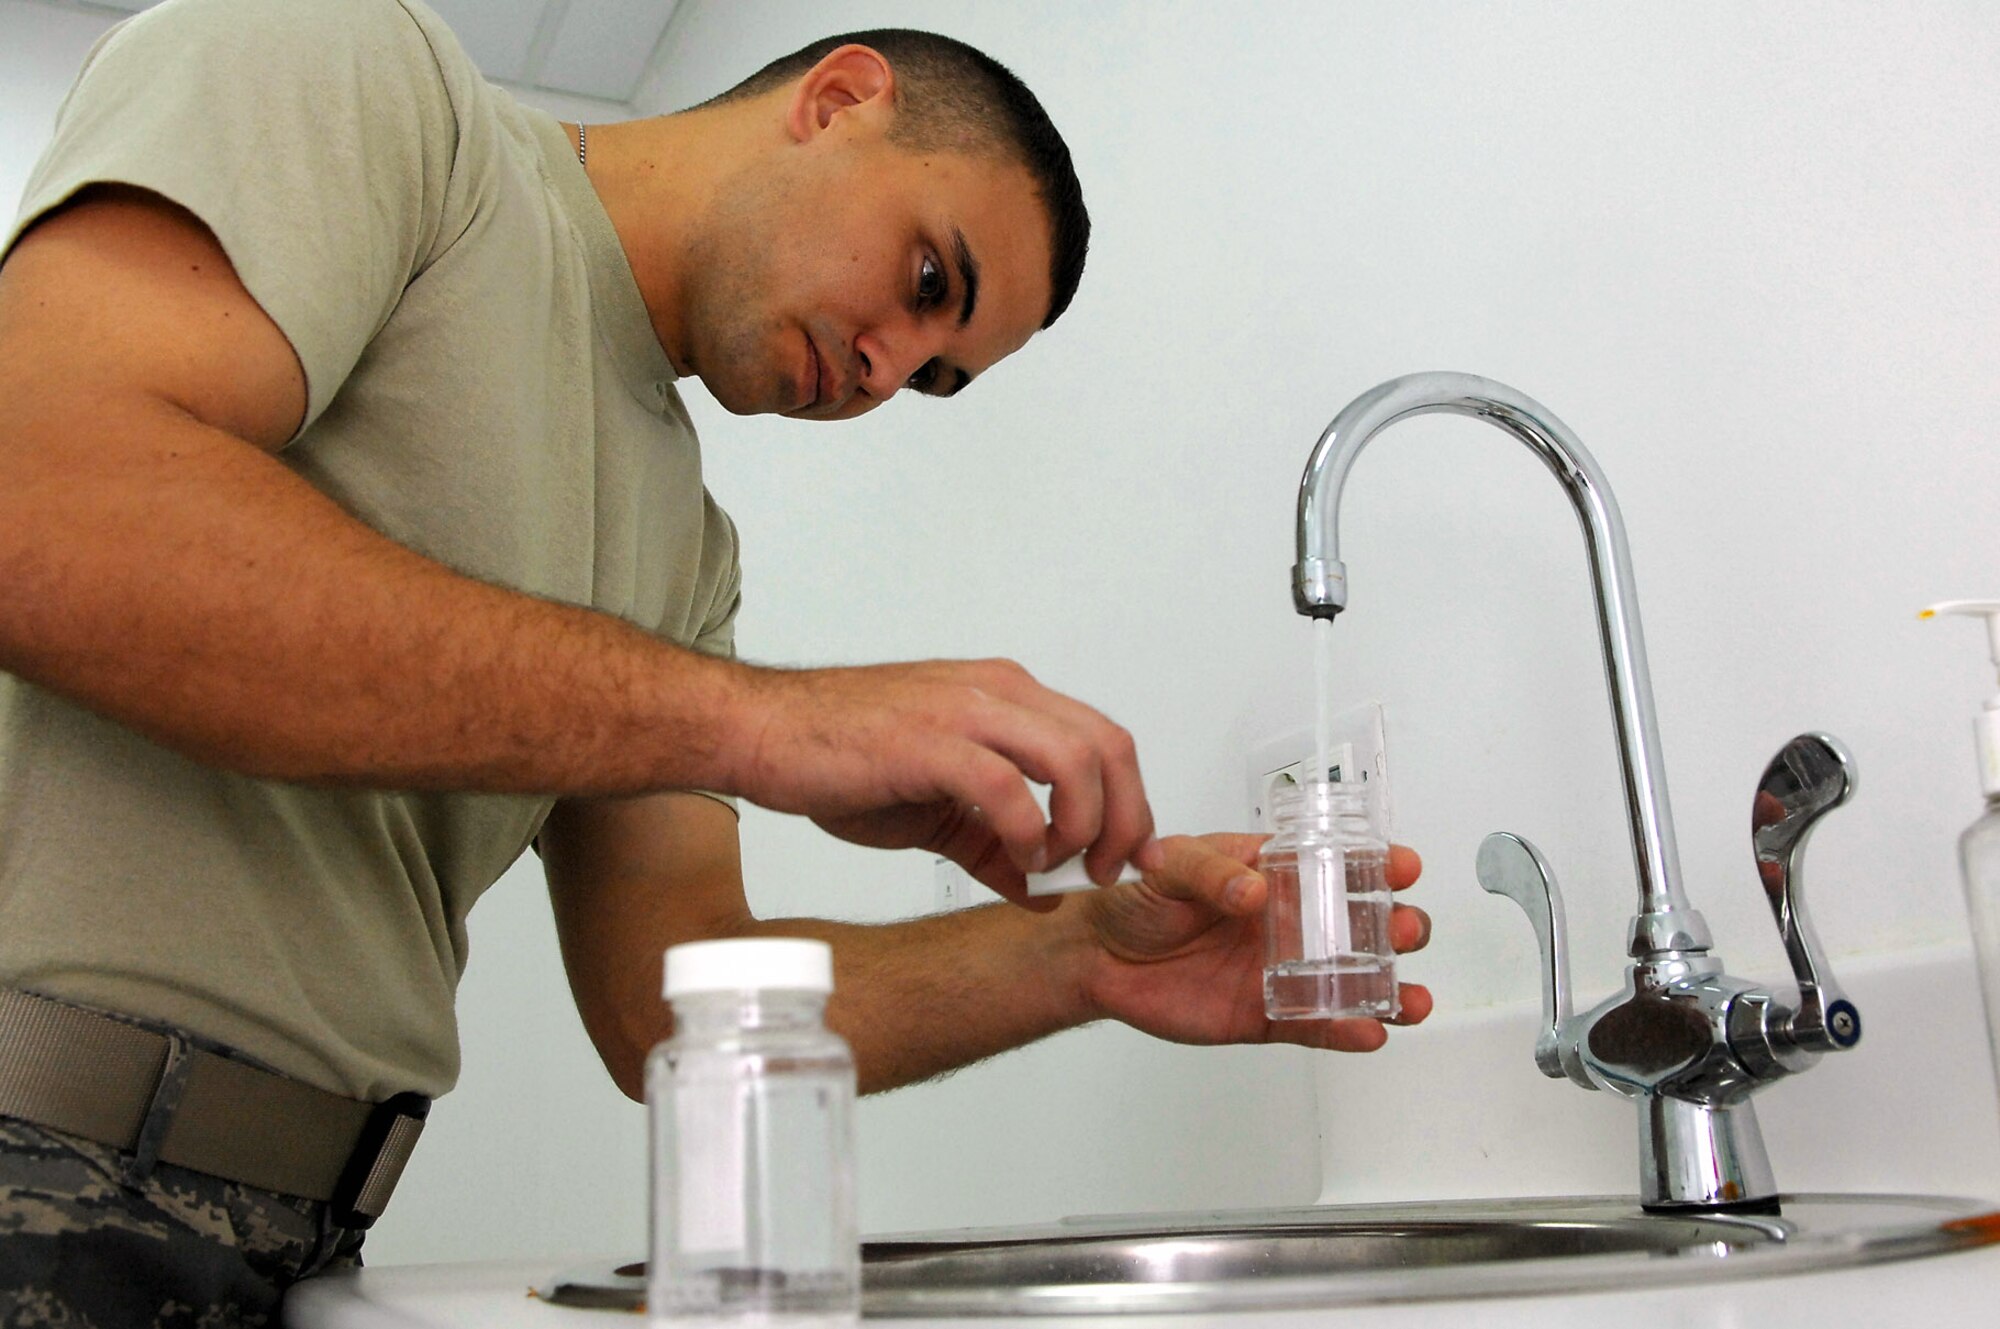 Staff Sgt. Gary Messer takes a sample of tap water for testing from the Air Force Theater Hospital March 13 at Balad Air Base, Iraq. The bioenvironmental personnel take random samples of water from many sources all over base daily to ensure its quality and safeness. Sergeant Messer, a 332nd Expeditionary Aerospace Medical Squadron bioenvironmental engineer, is deployed from Lackland Air Force Base, Texas. (U.S. Air Force photo/Senior Airman Julianne Showalter)